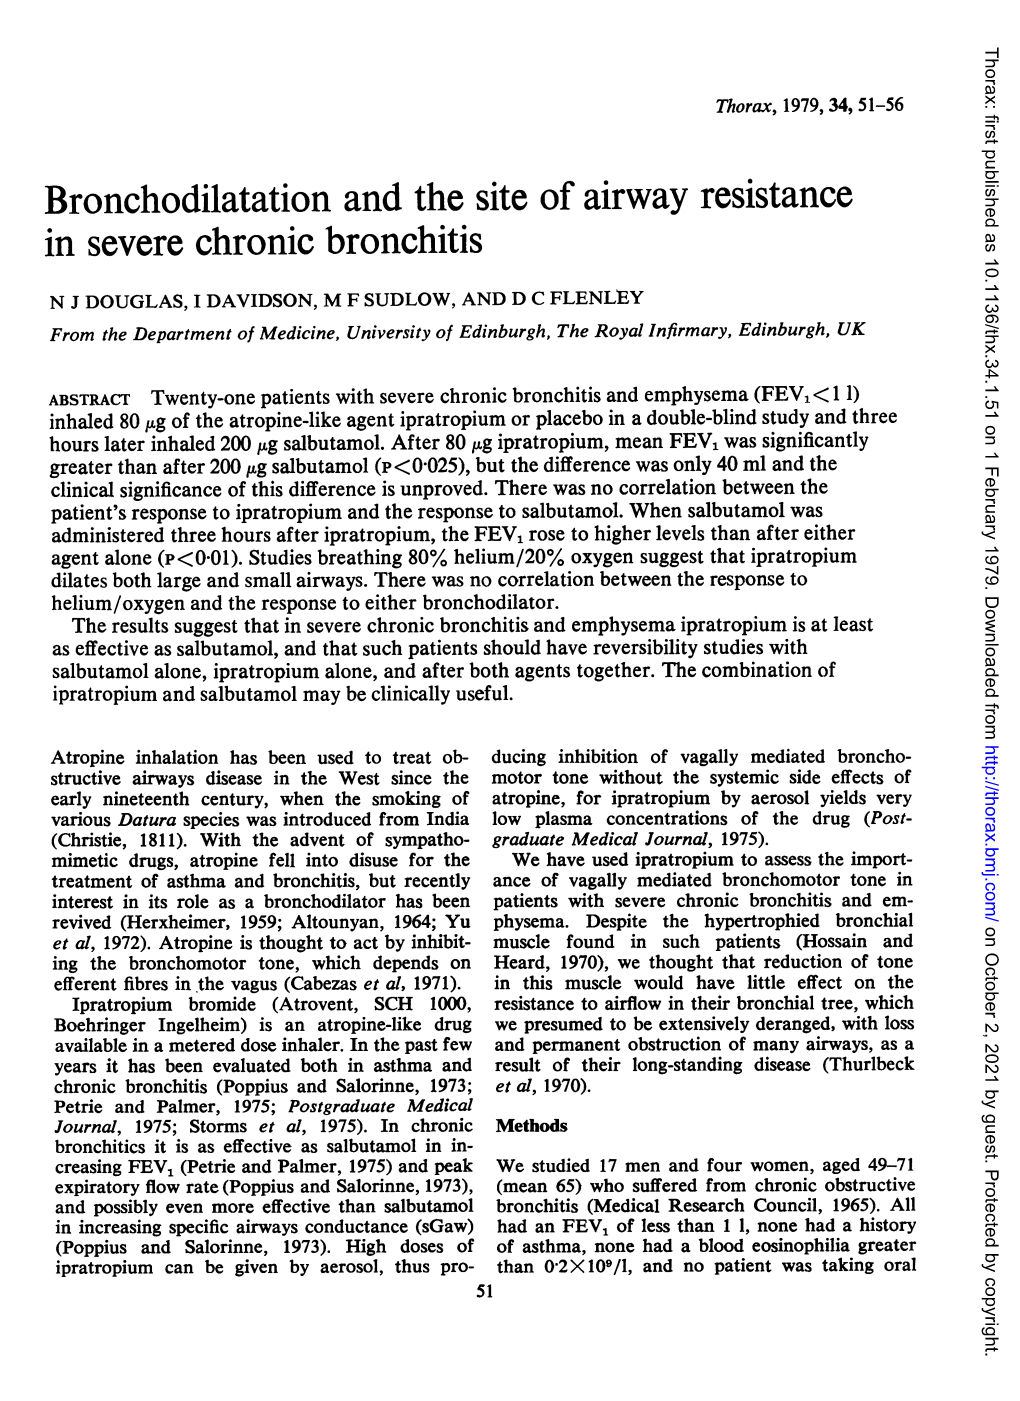 Bronchodilatation and the Site of Airway Resistance in Severe Chronic Bronchitis